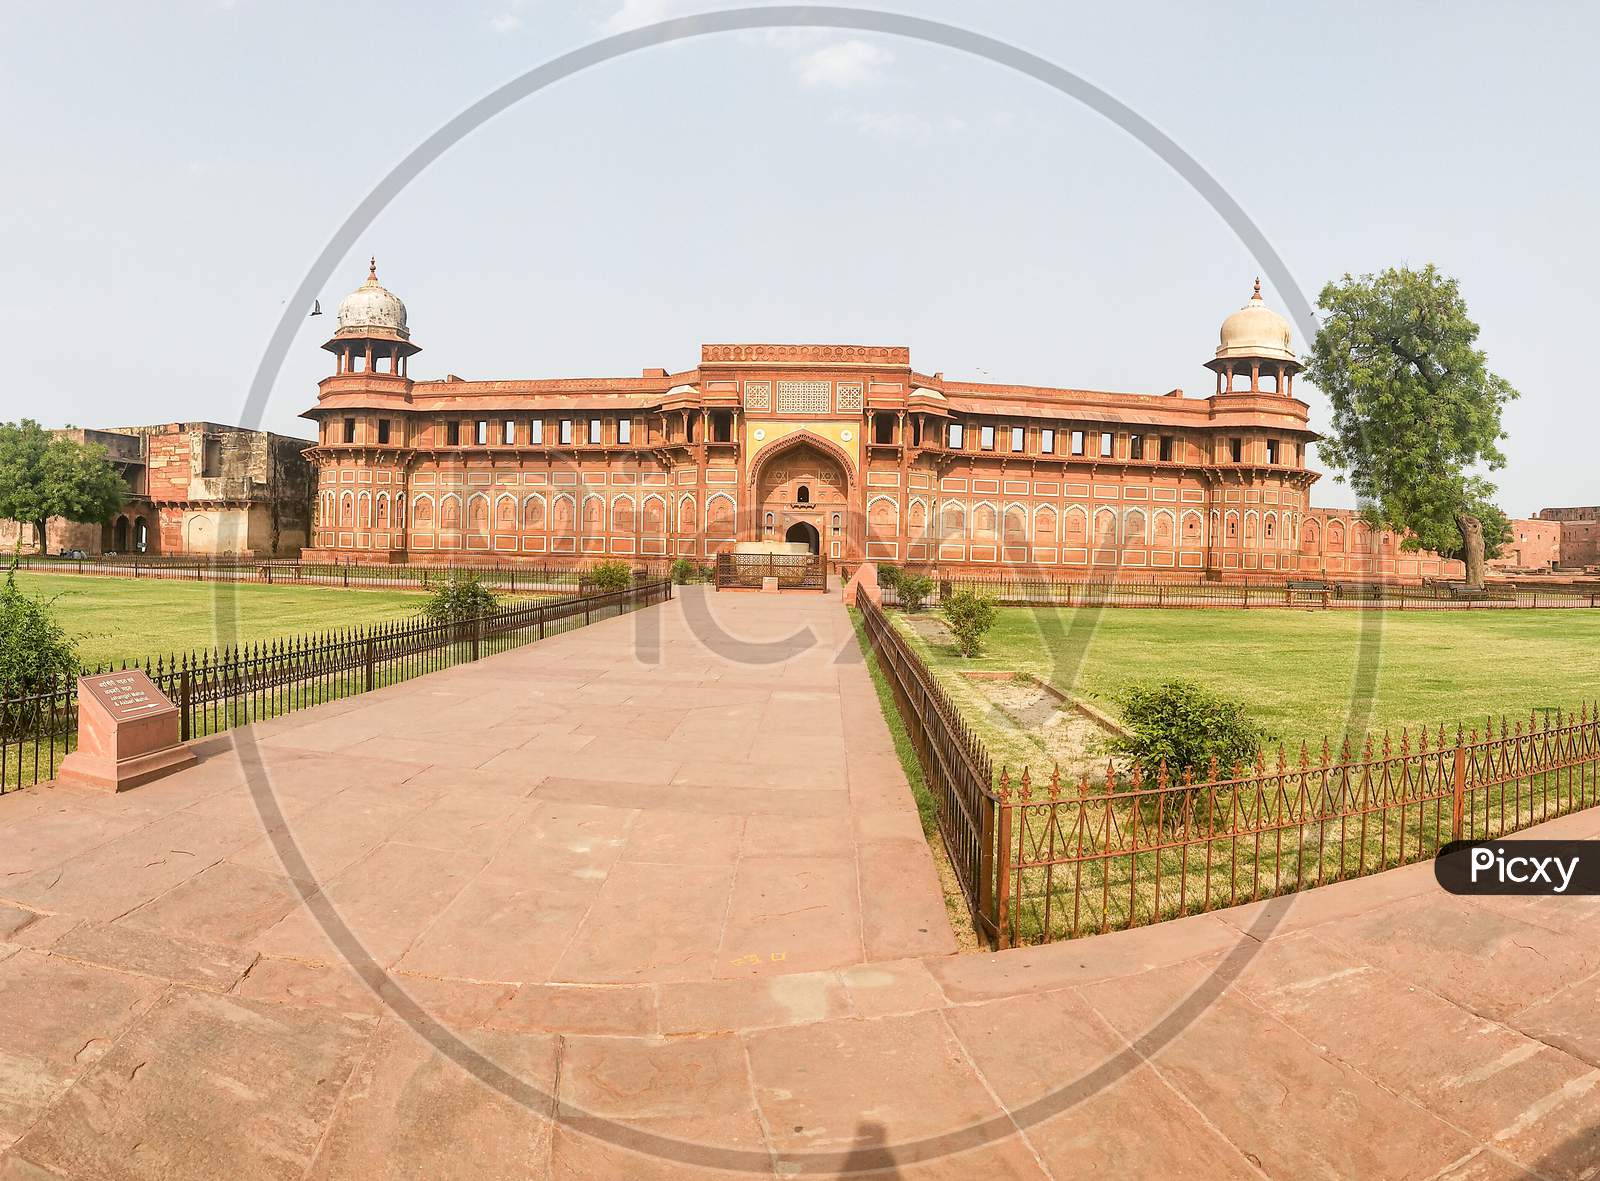 Agra fort in most famous tourist attractions India